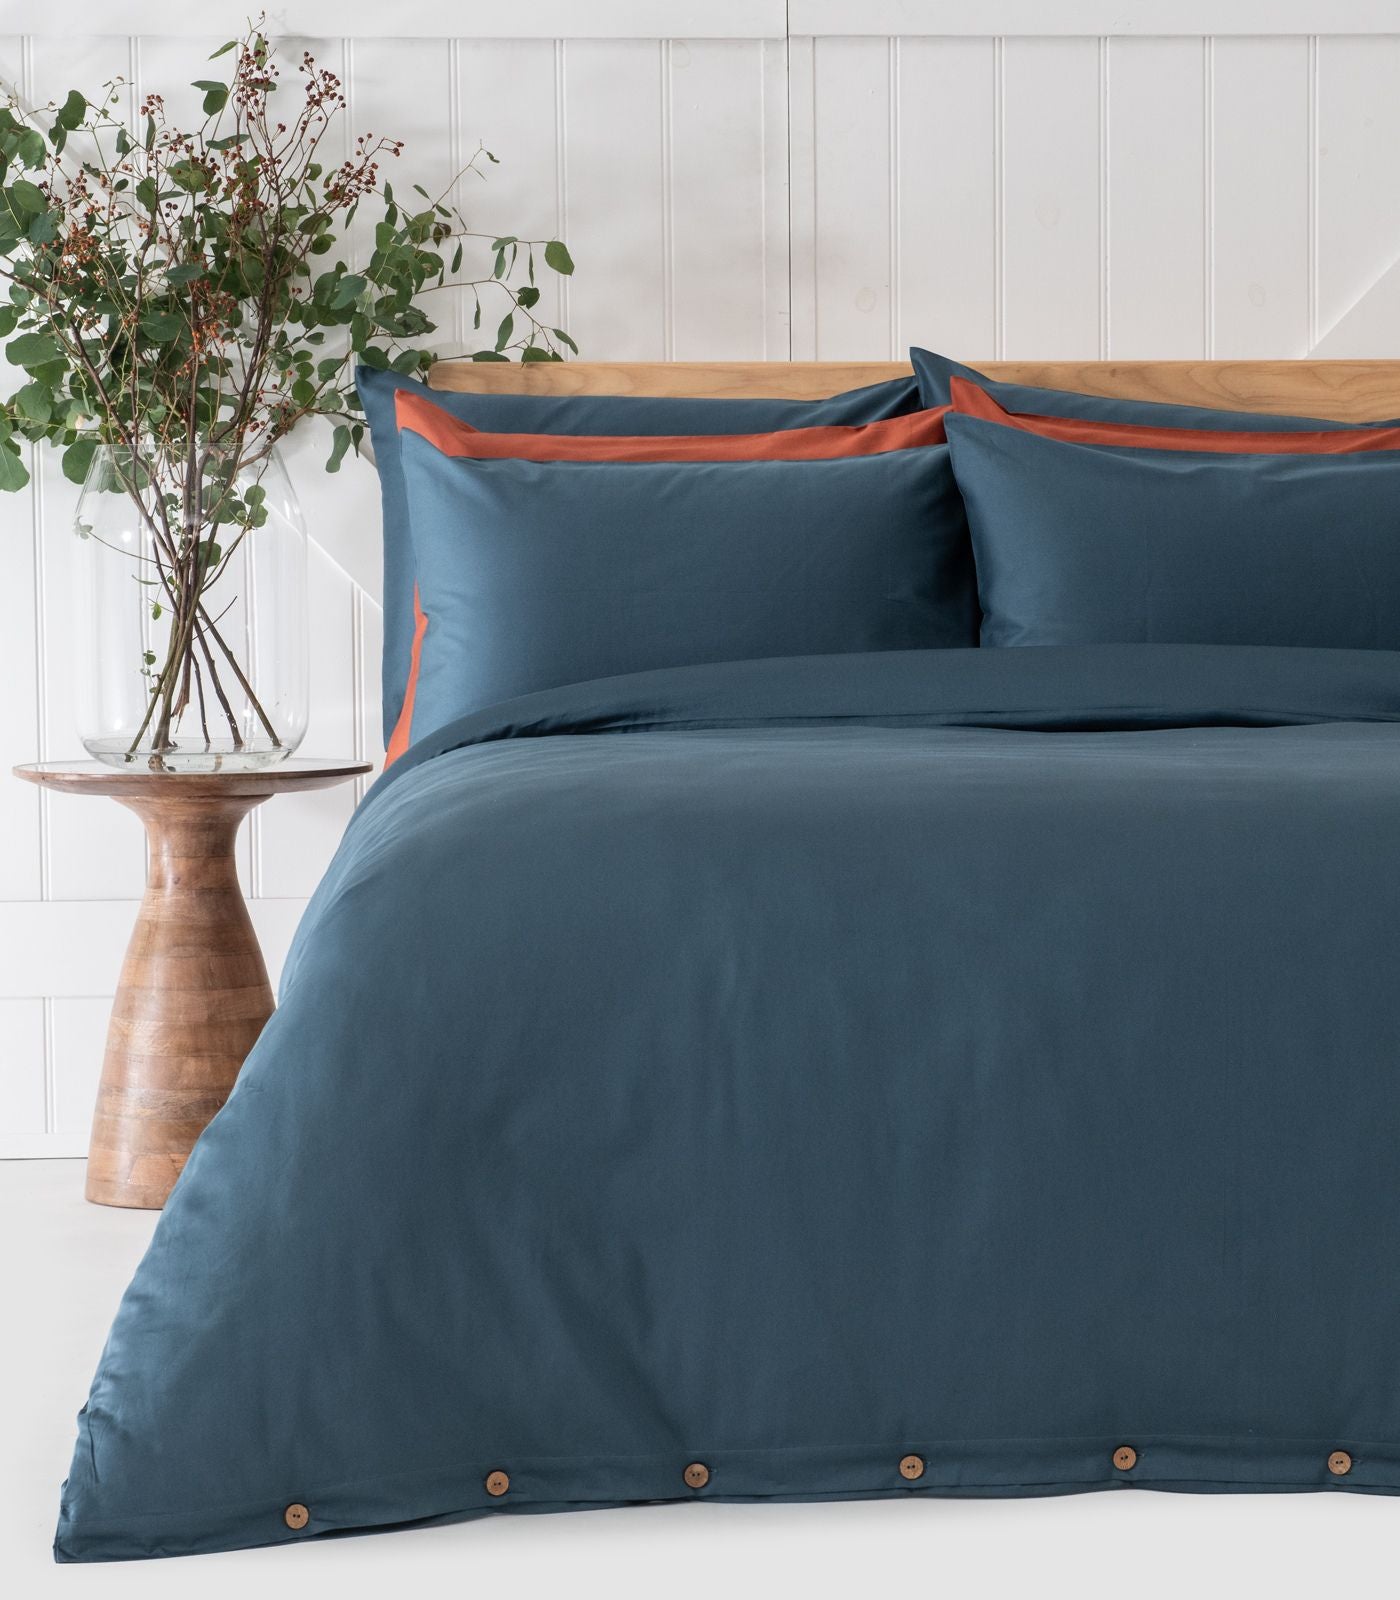 Bhumi Organic Cotton - Sateen Plain Quilt Cover - Indian Teal